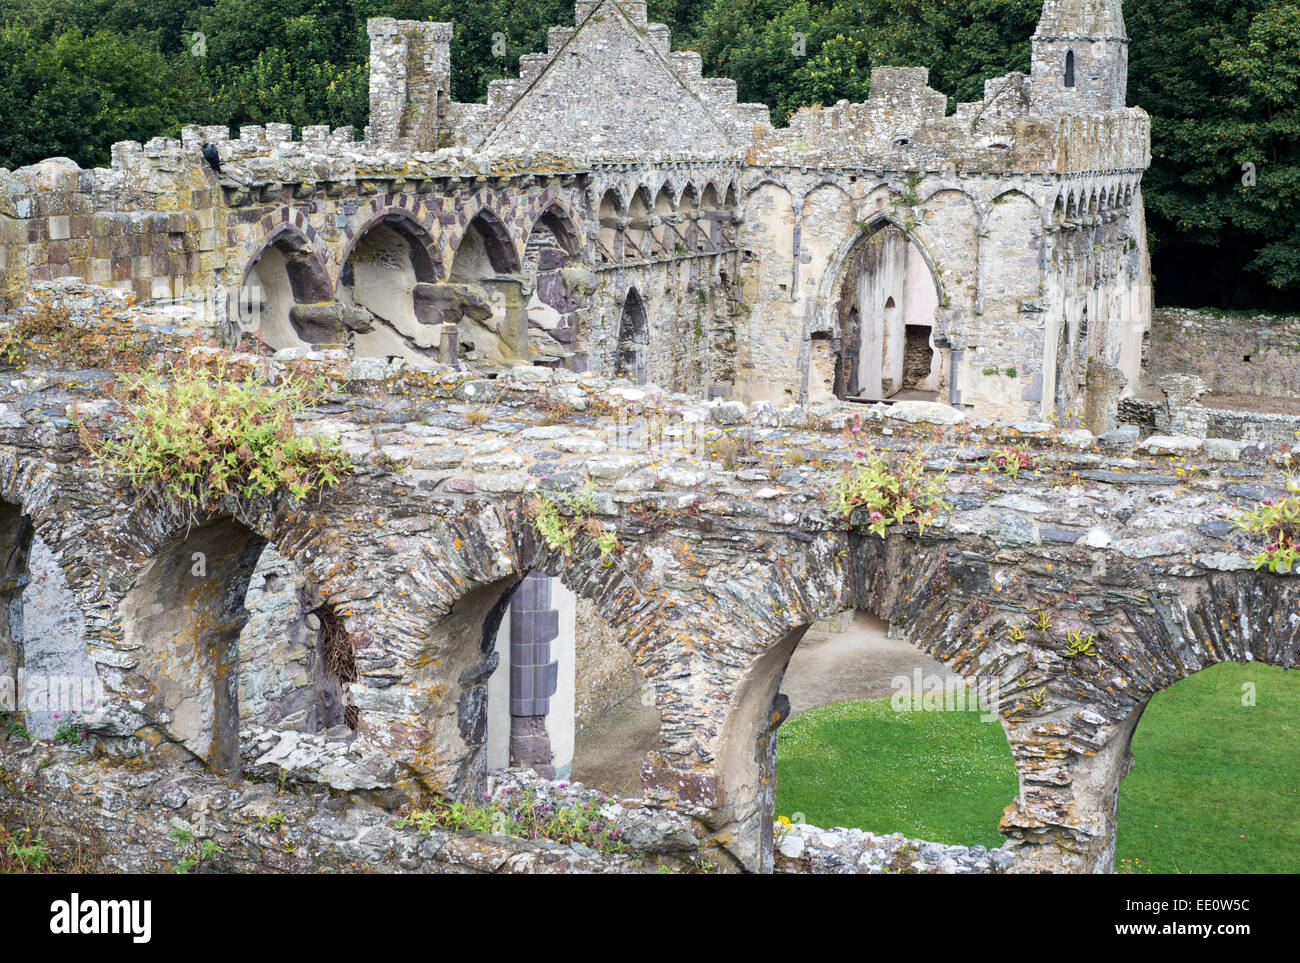 The ruins of St Davids Bishops Palace located adjacent to St Davids Cathedral in the city of St Davids, Wales Stock Photo